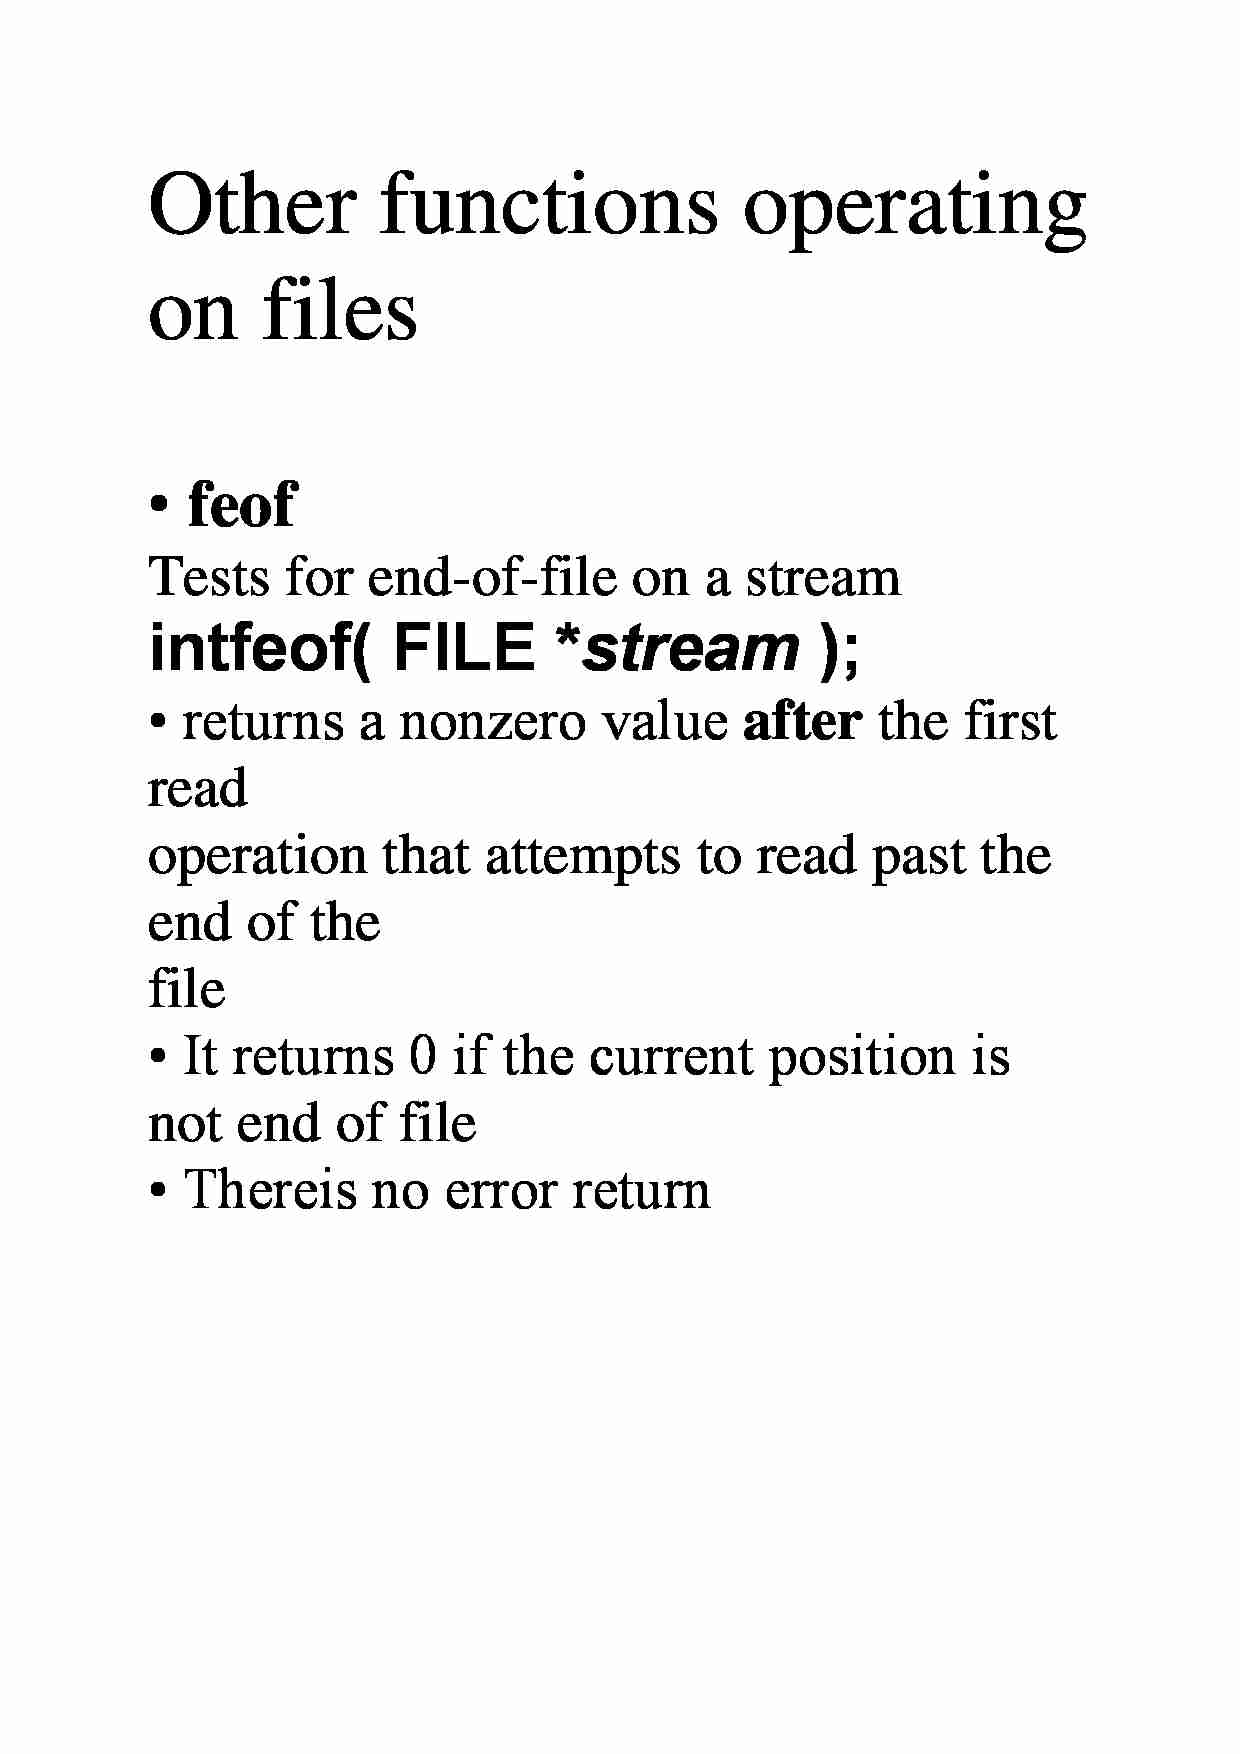 Other functions operating on files - strona 1